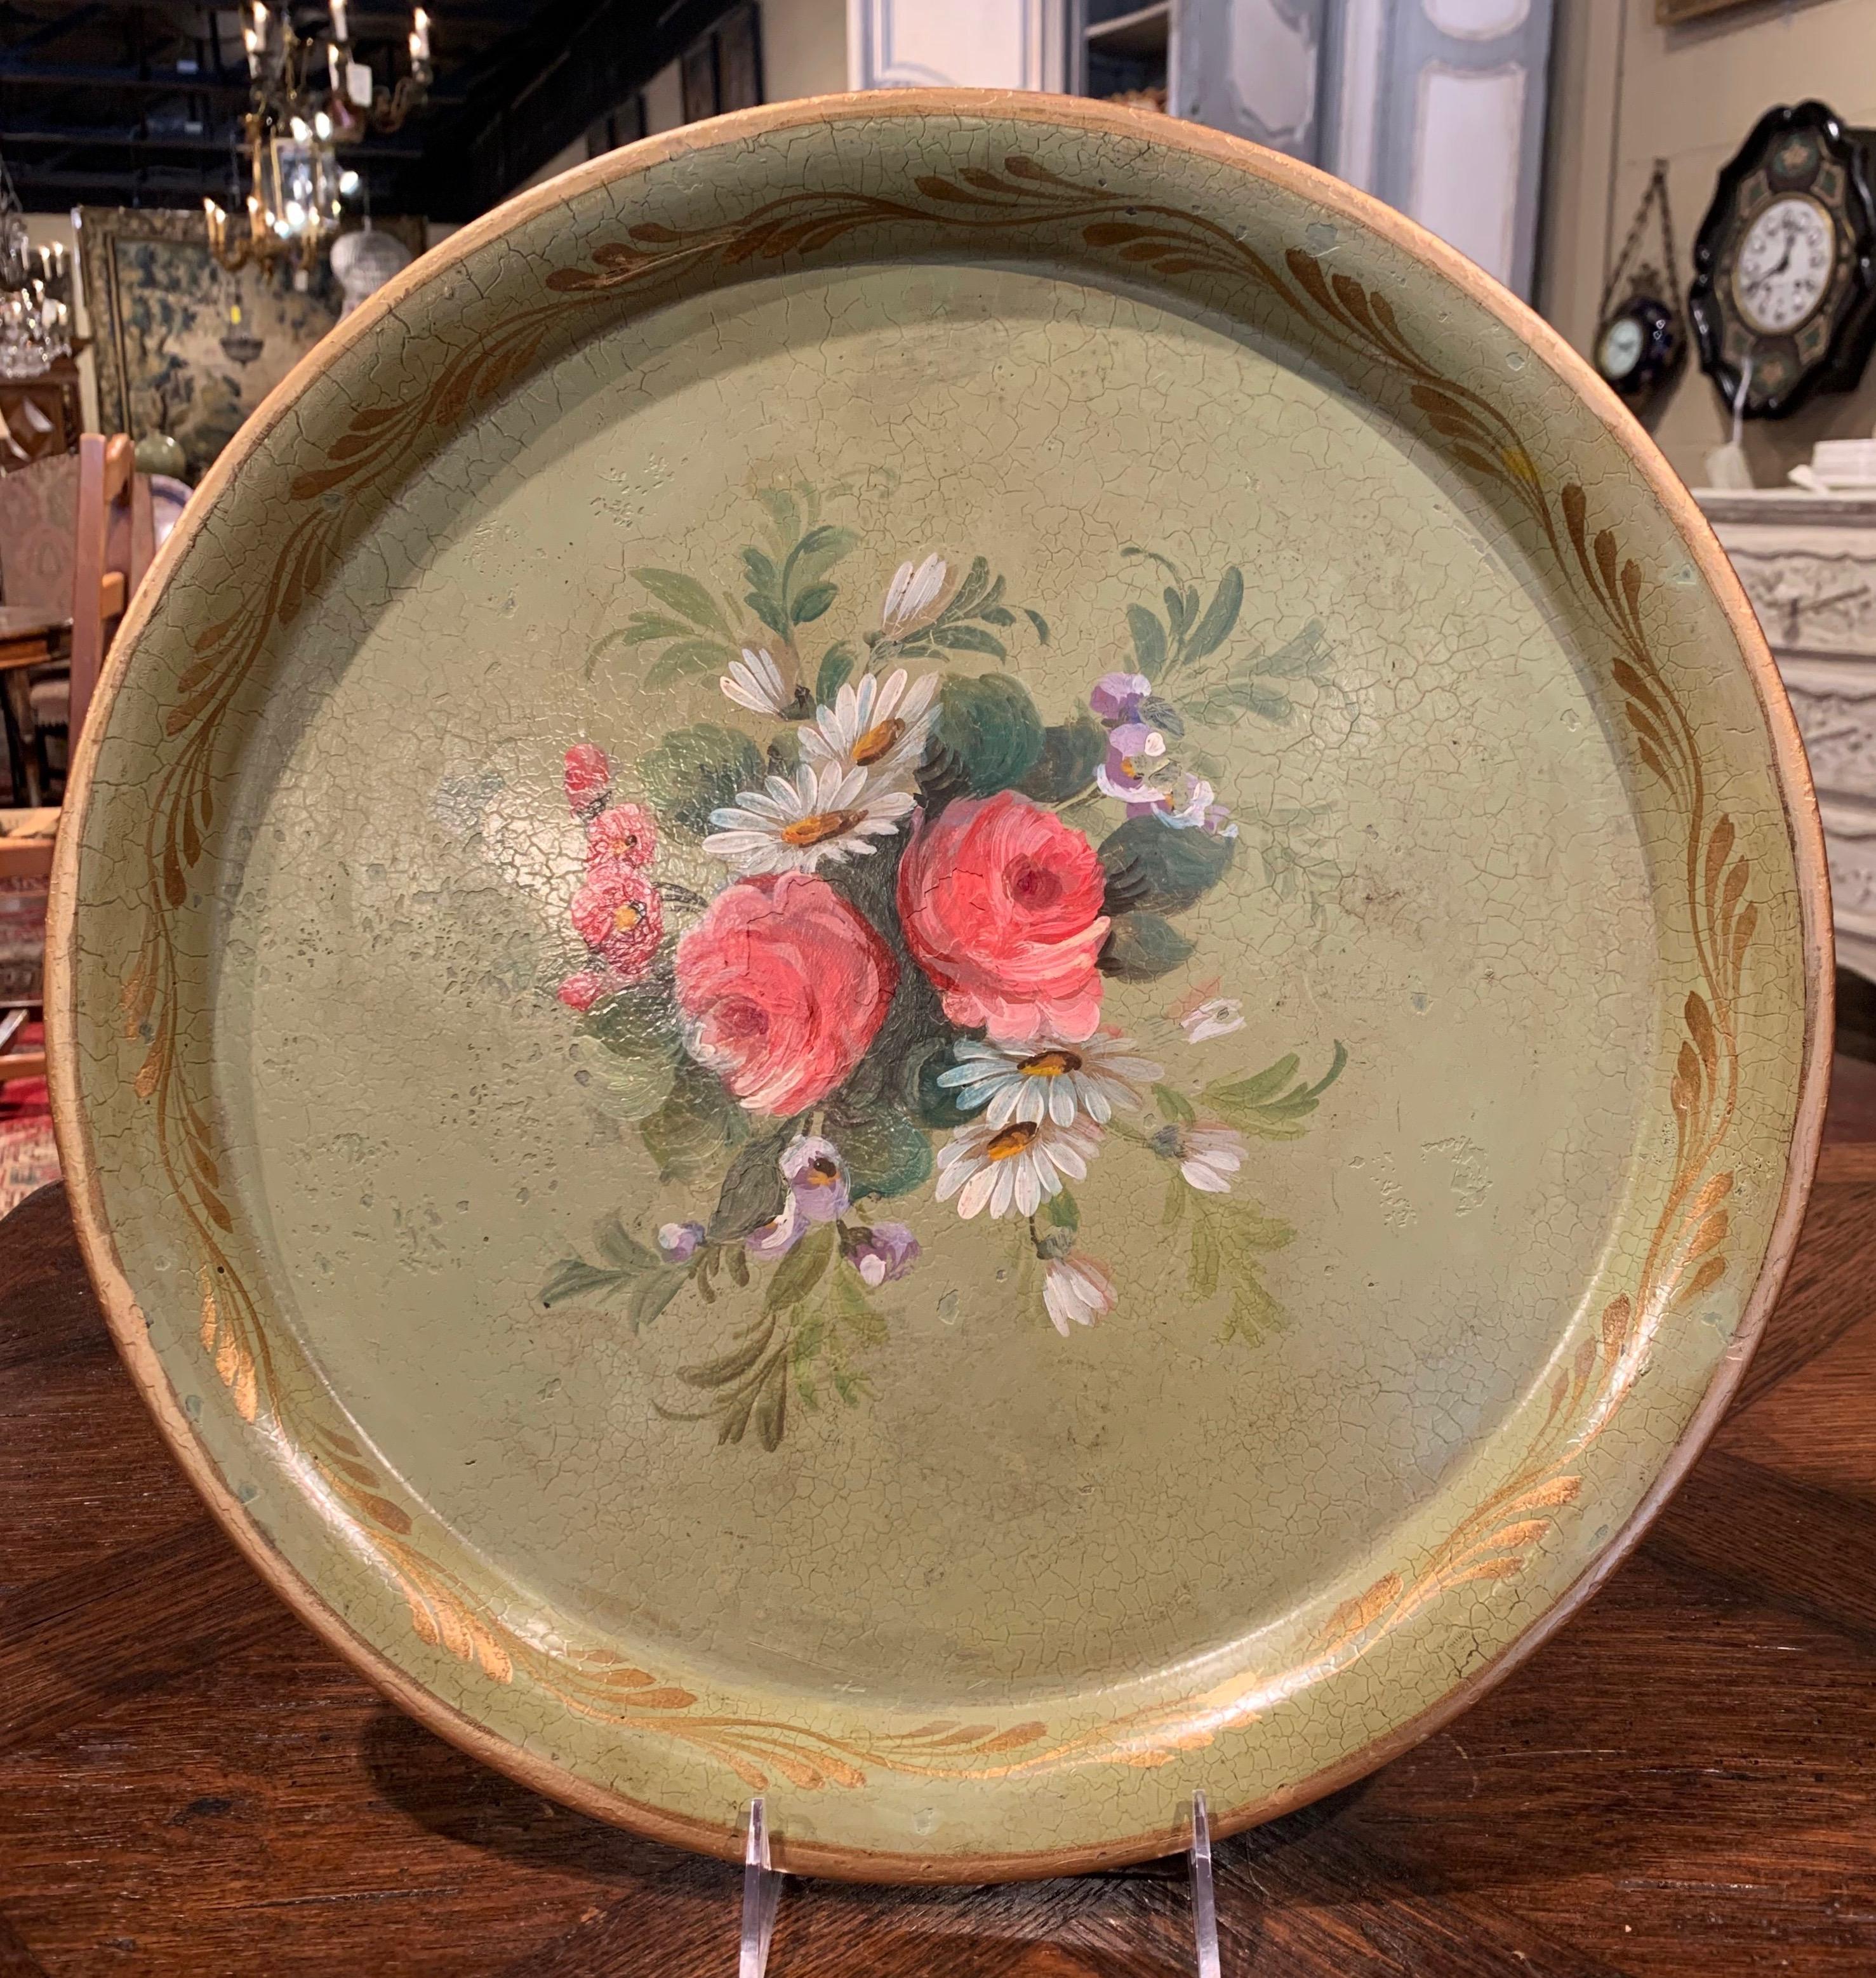 Napoleon III 19th Century French Hand Painted Tole Tray with Flowers and Foliage